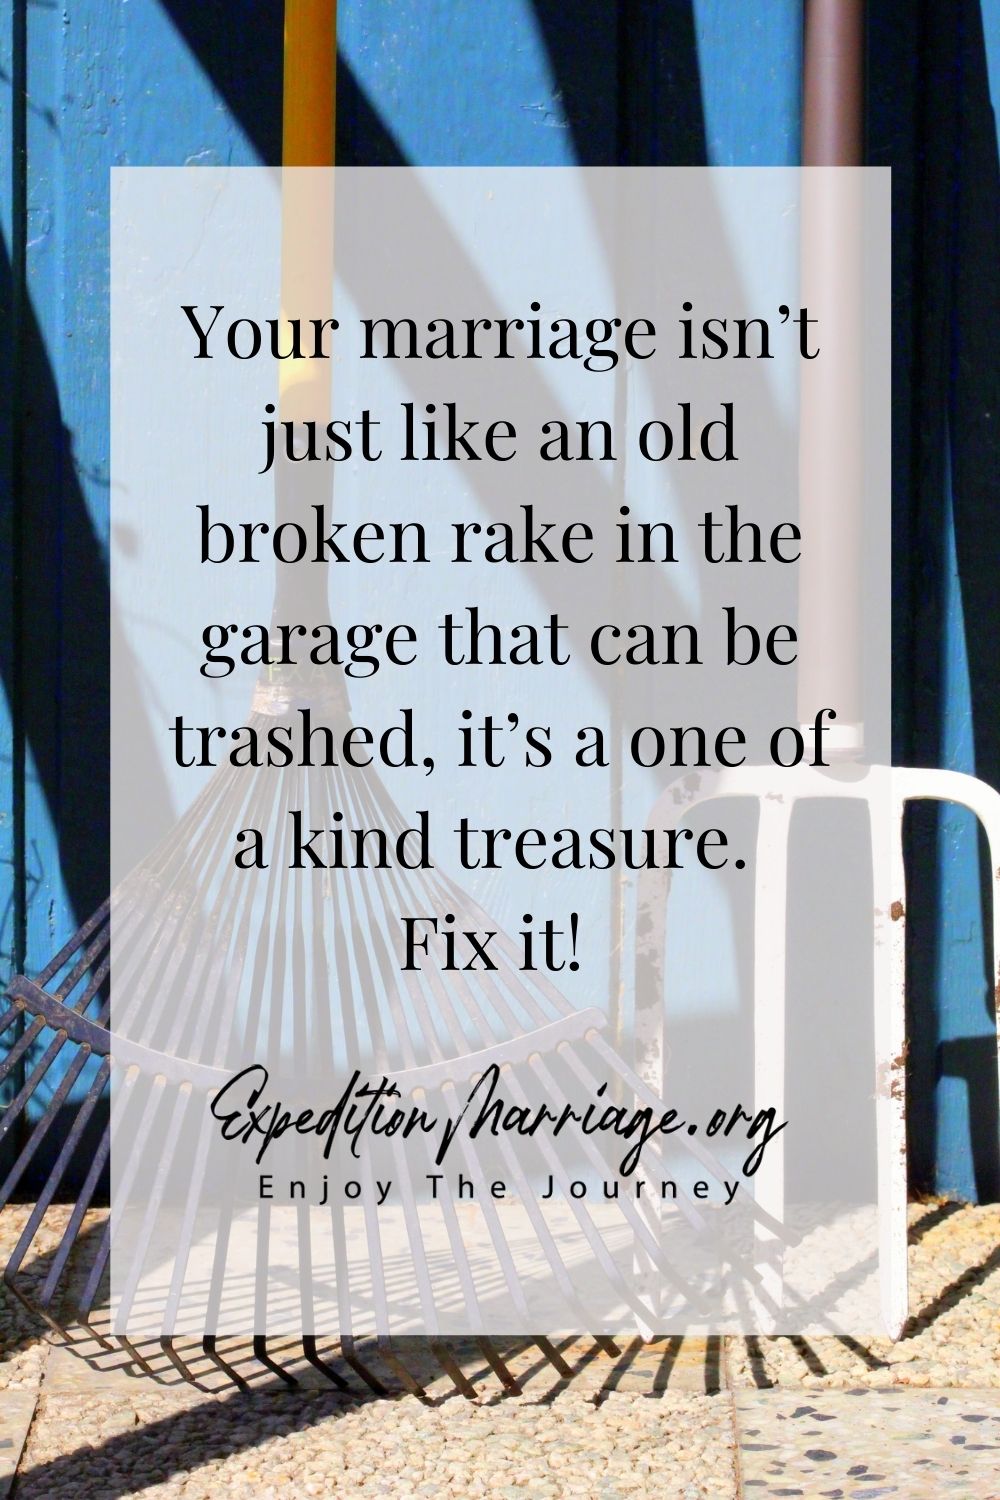 Emphasizing the importance of taking care of marriage